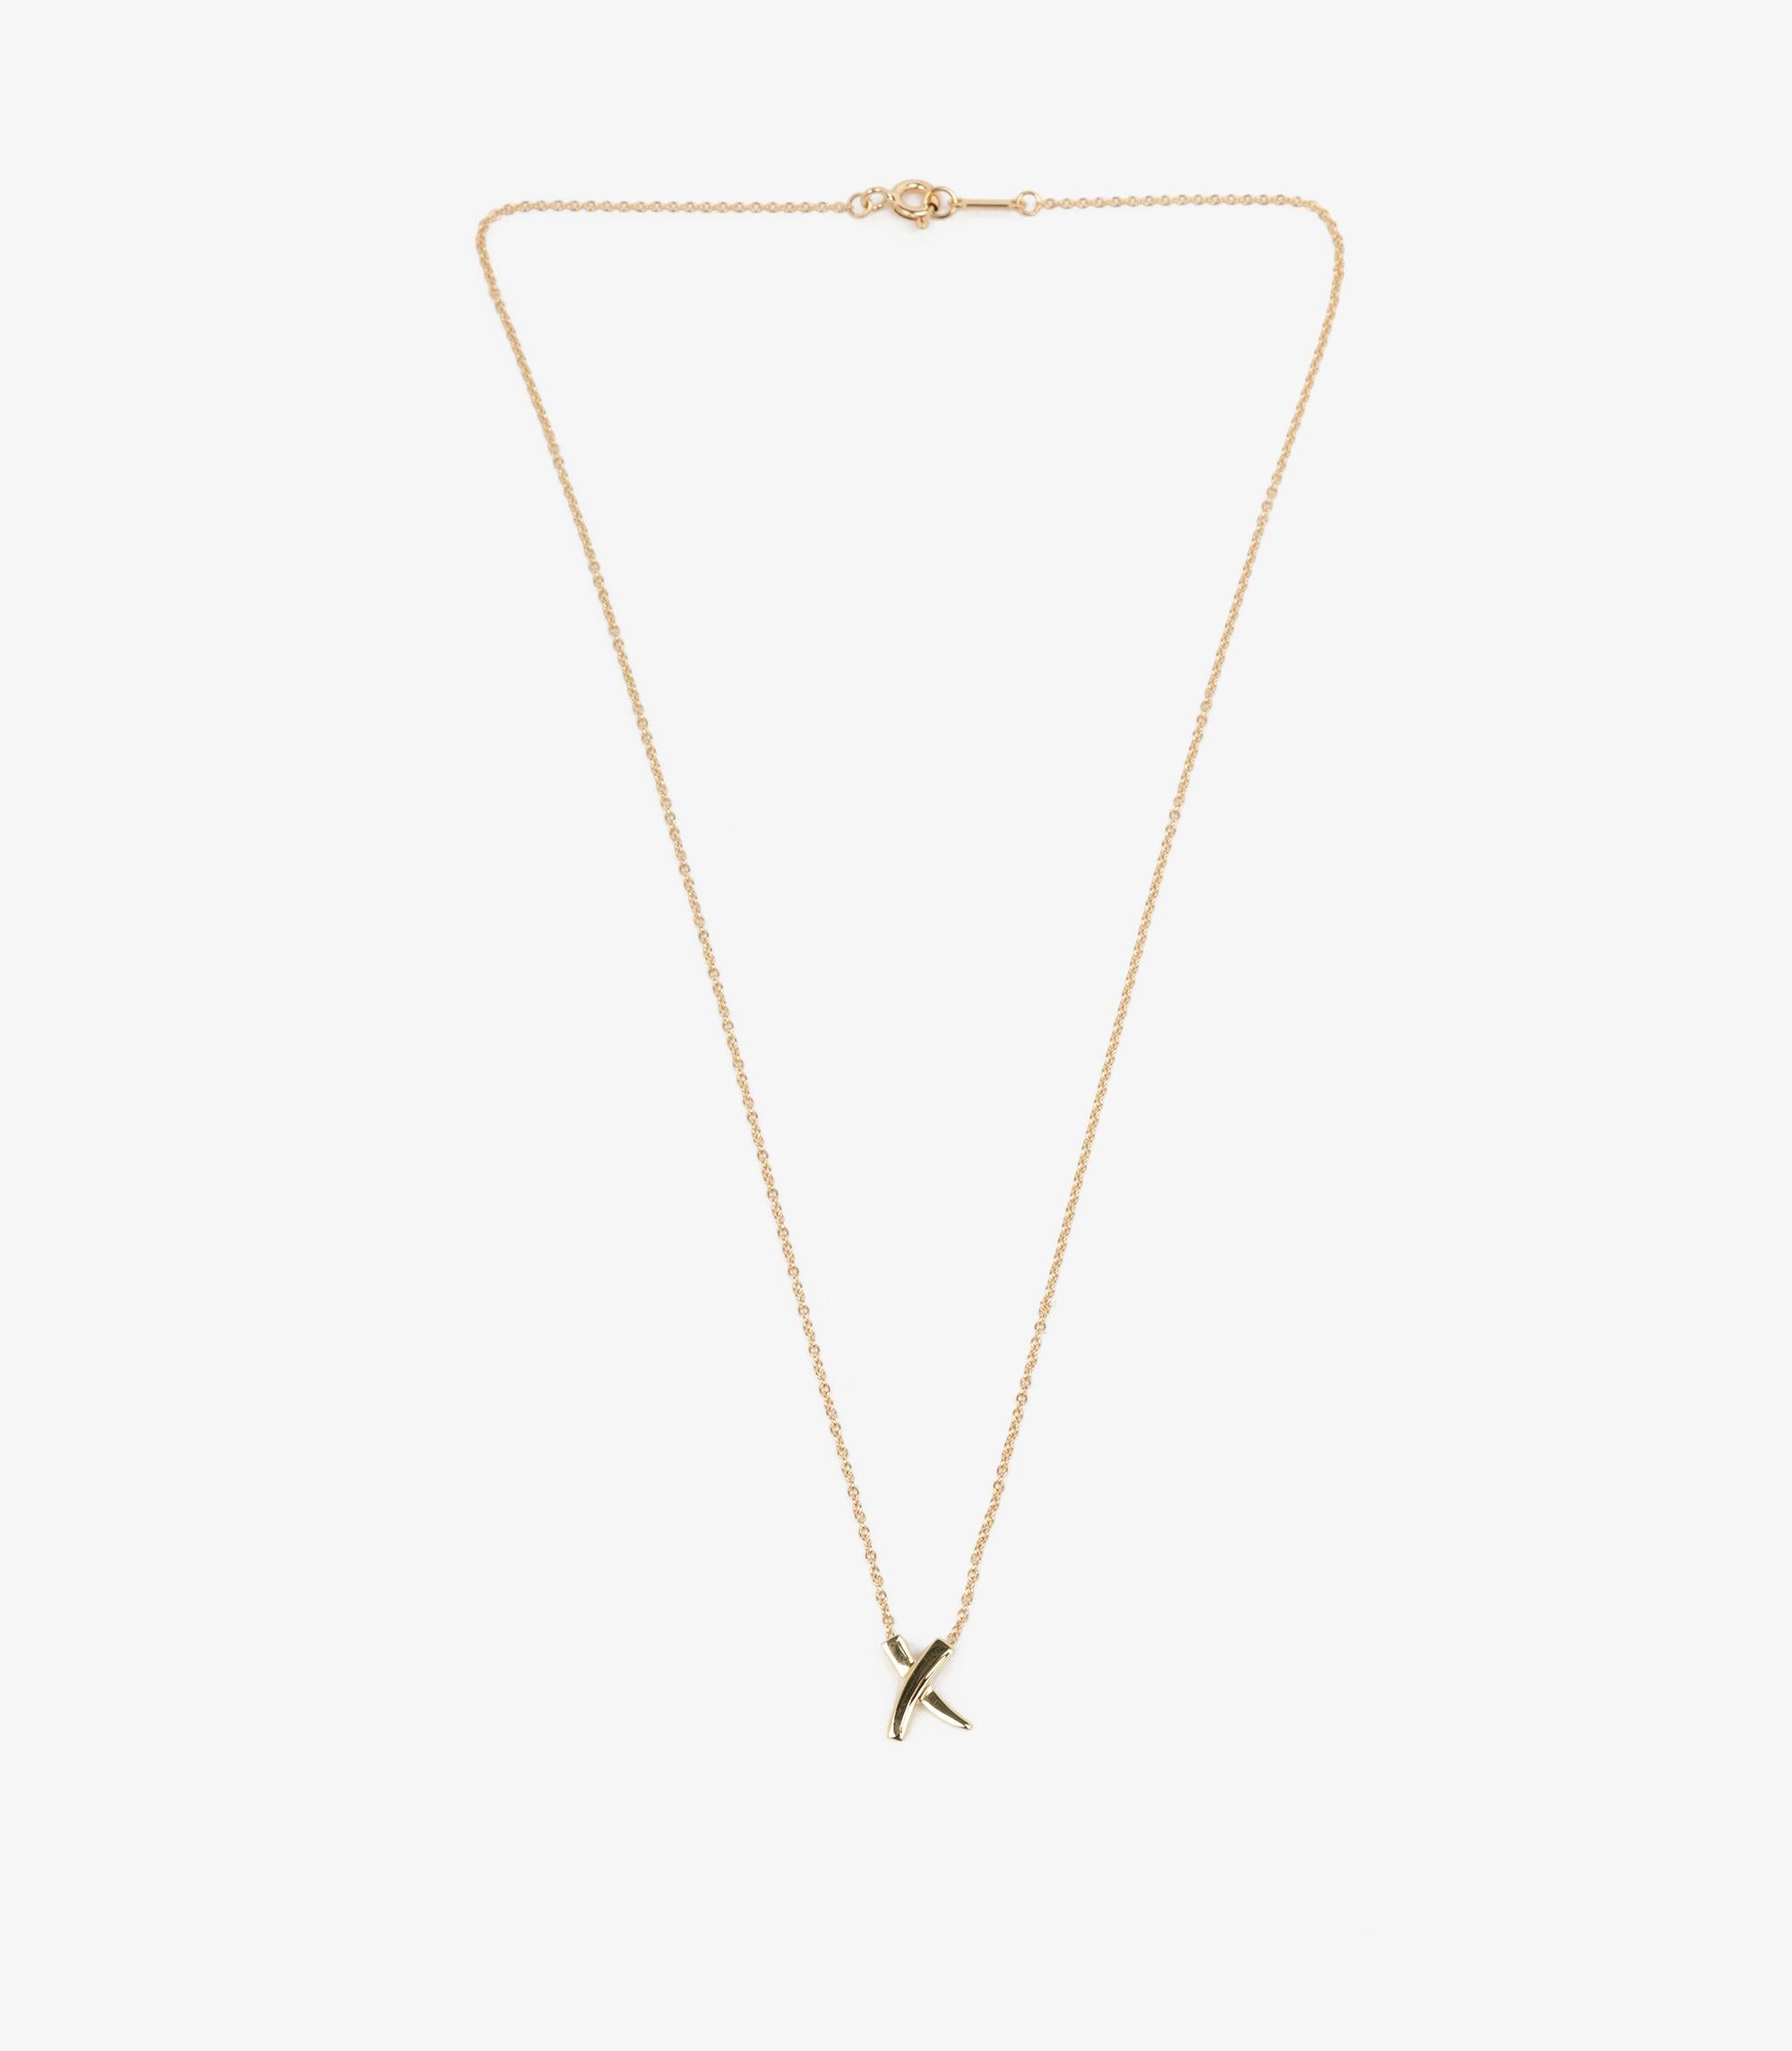 Tiffany & Co. 18ct Yellow Gold Paloma Picasso Mini X Necklace In Excellent Condition For Sale In Bishop's Stortford, Hertfordshire